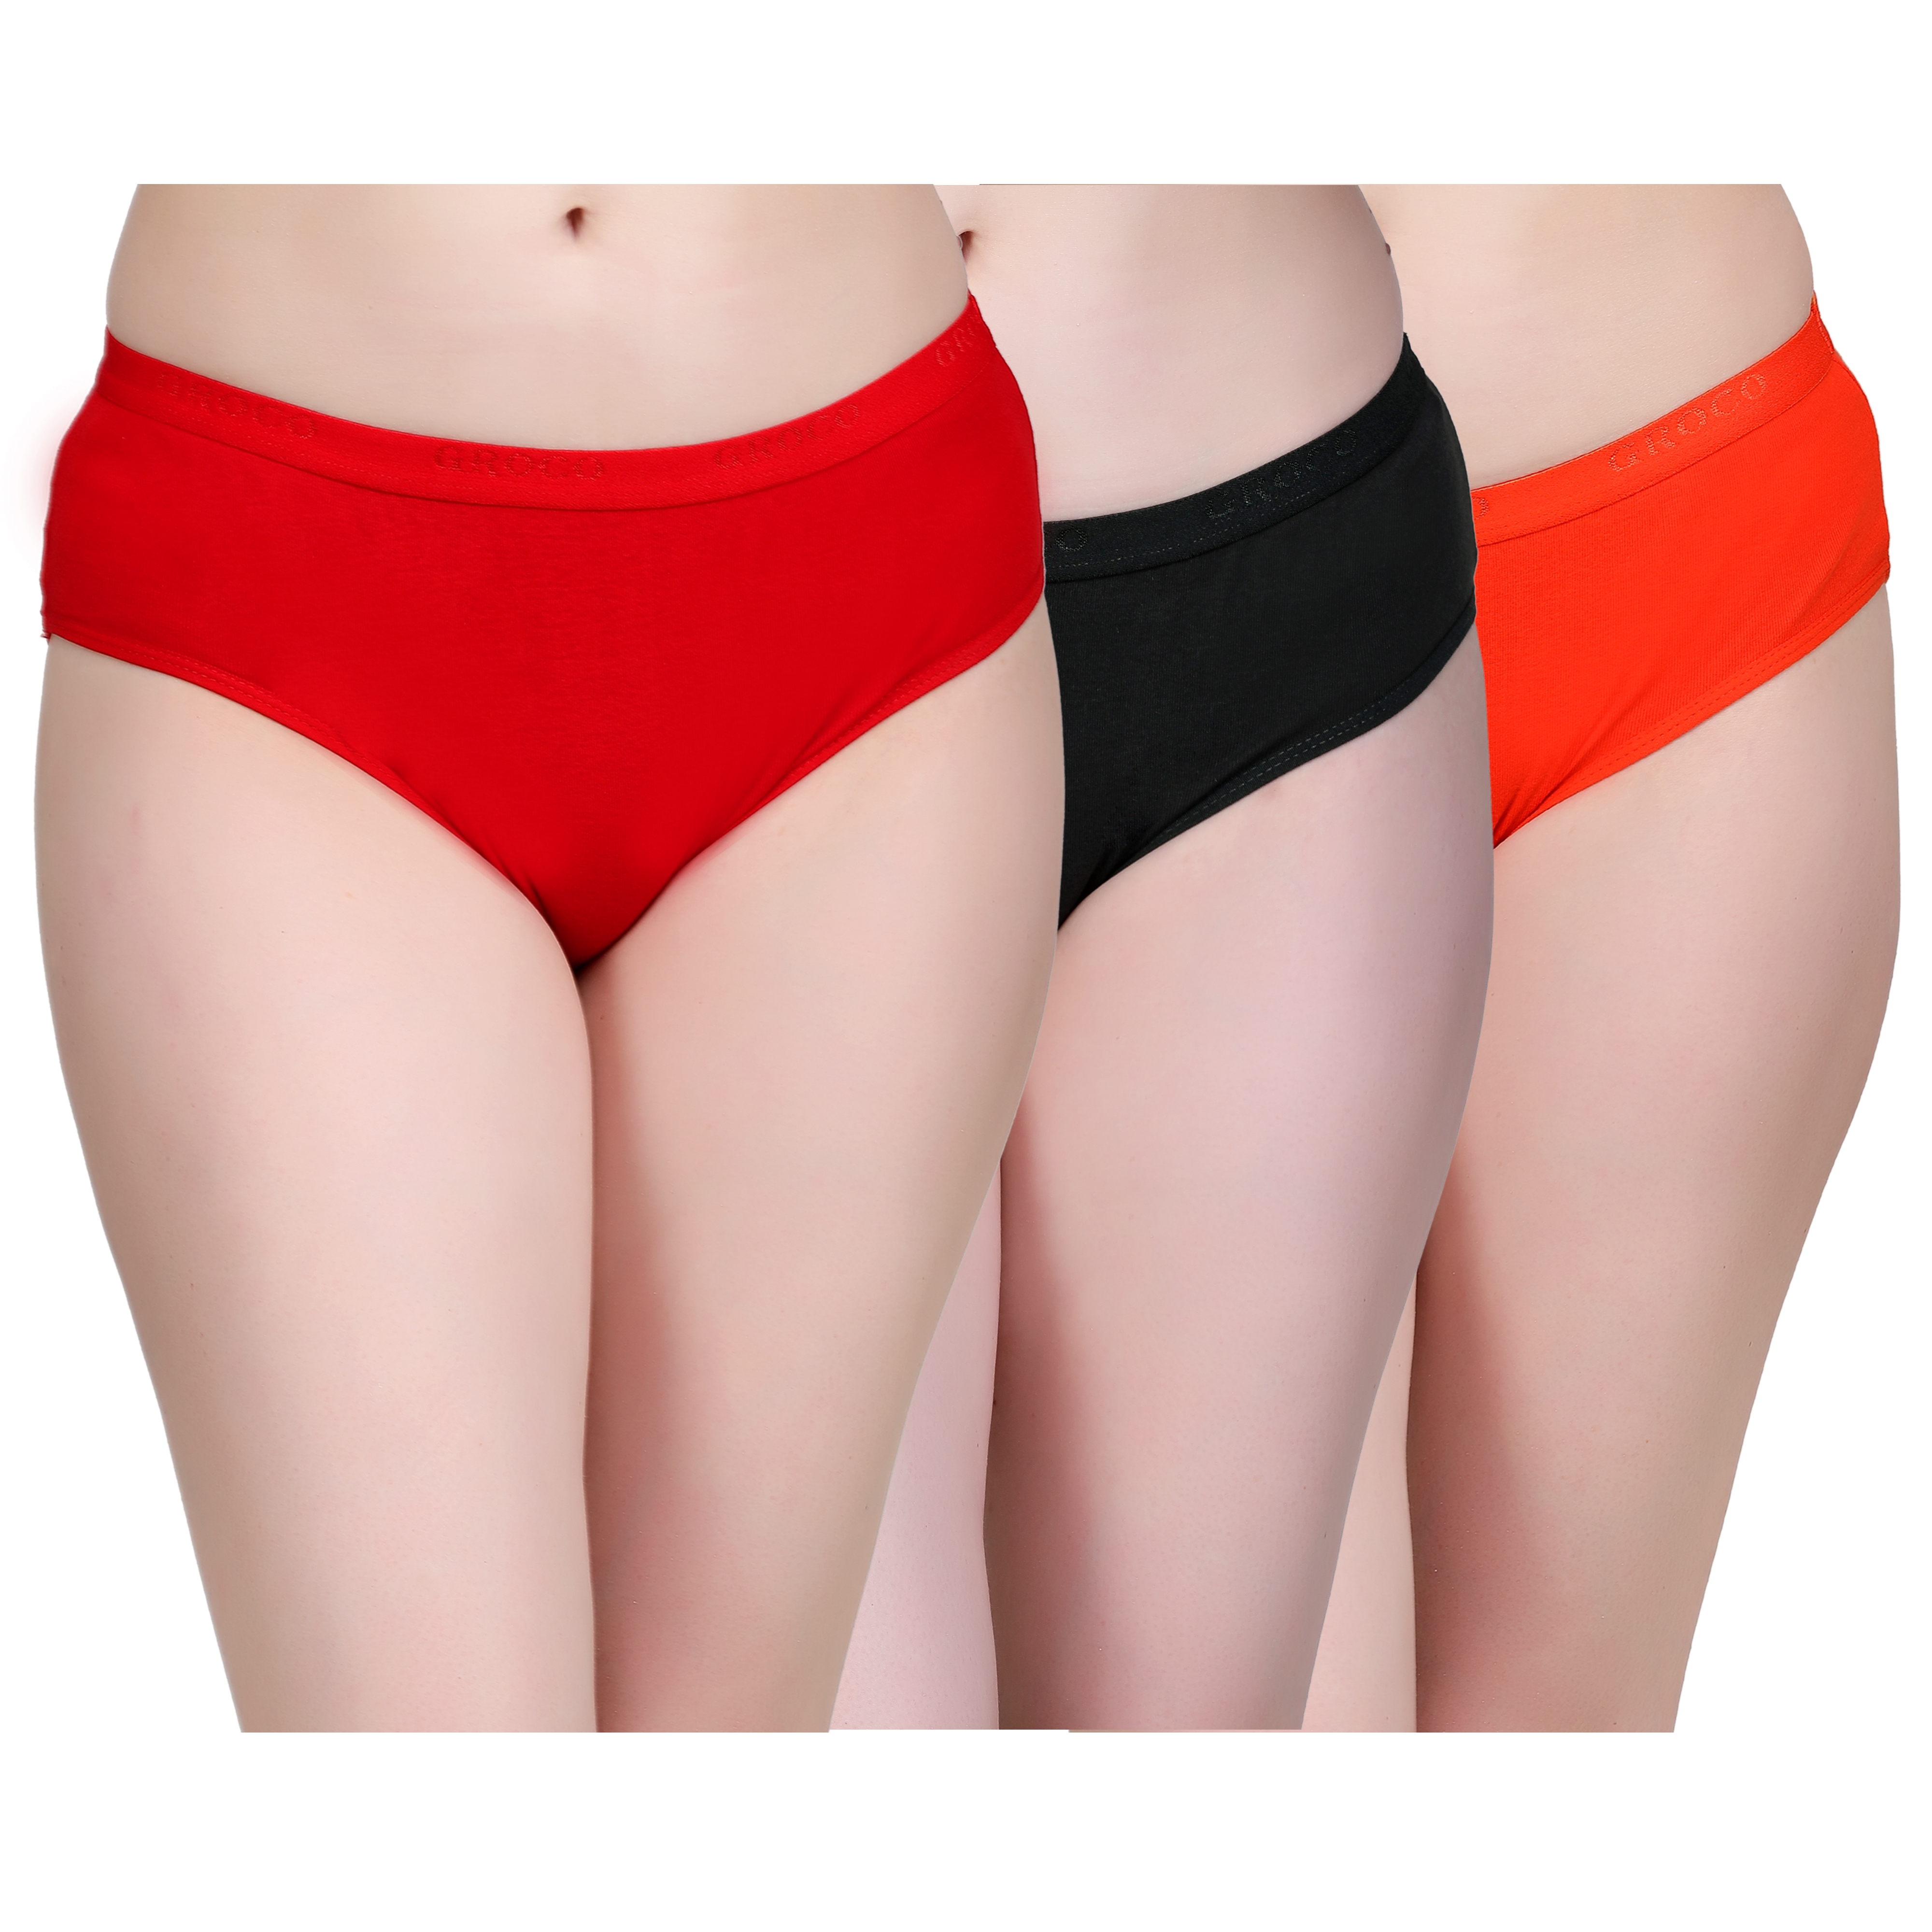 PEACH SMILE | PEACH SMILE Hipster Panties for Women 0